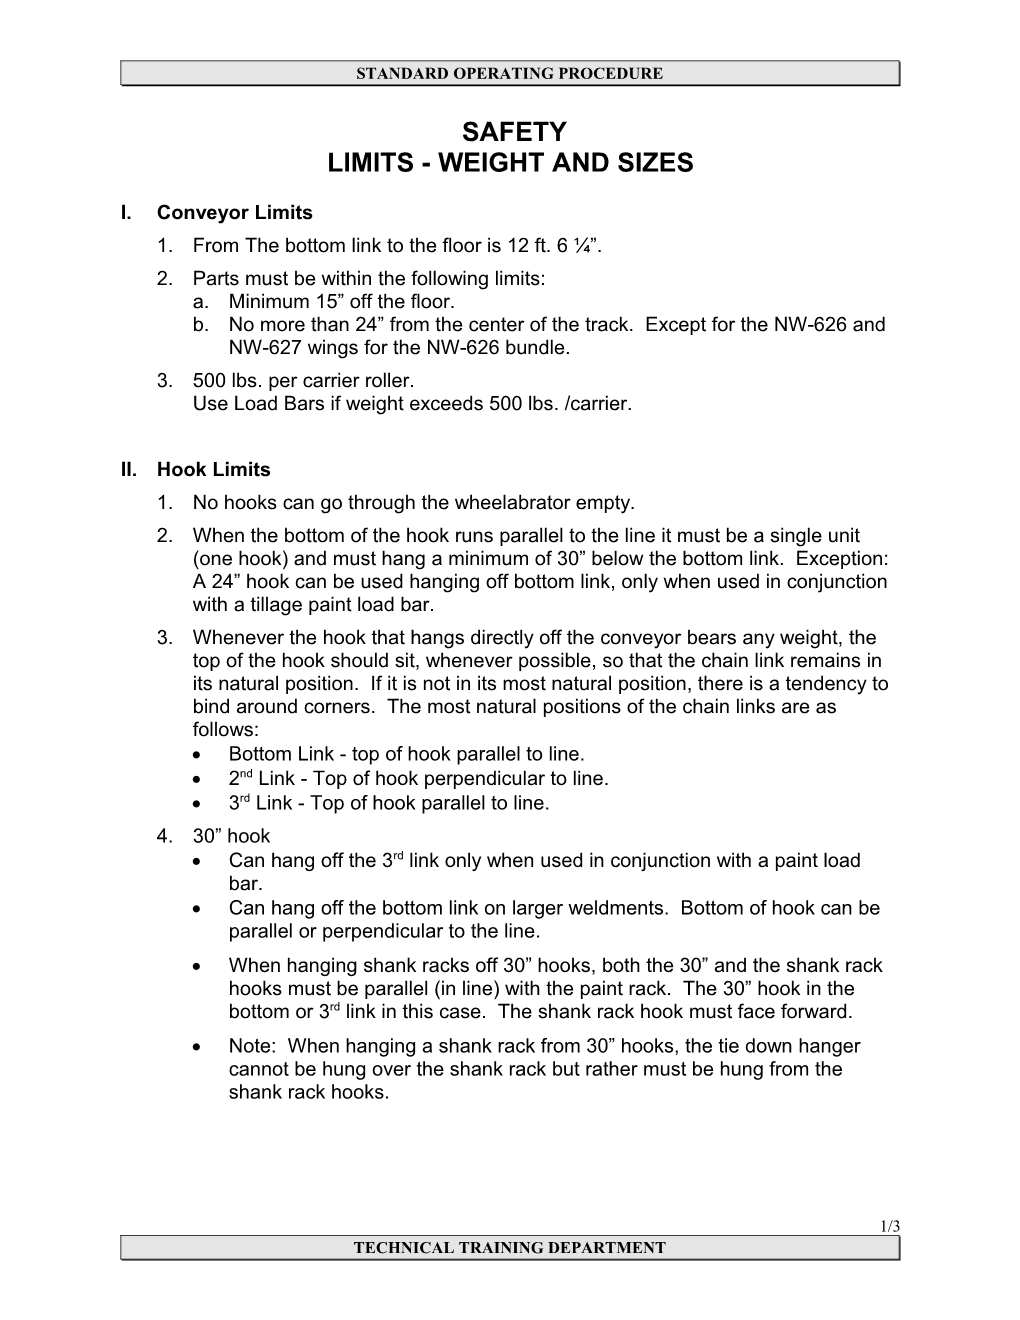 (Company) Safety Limits, Weights and Sizes